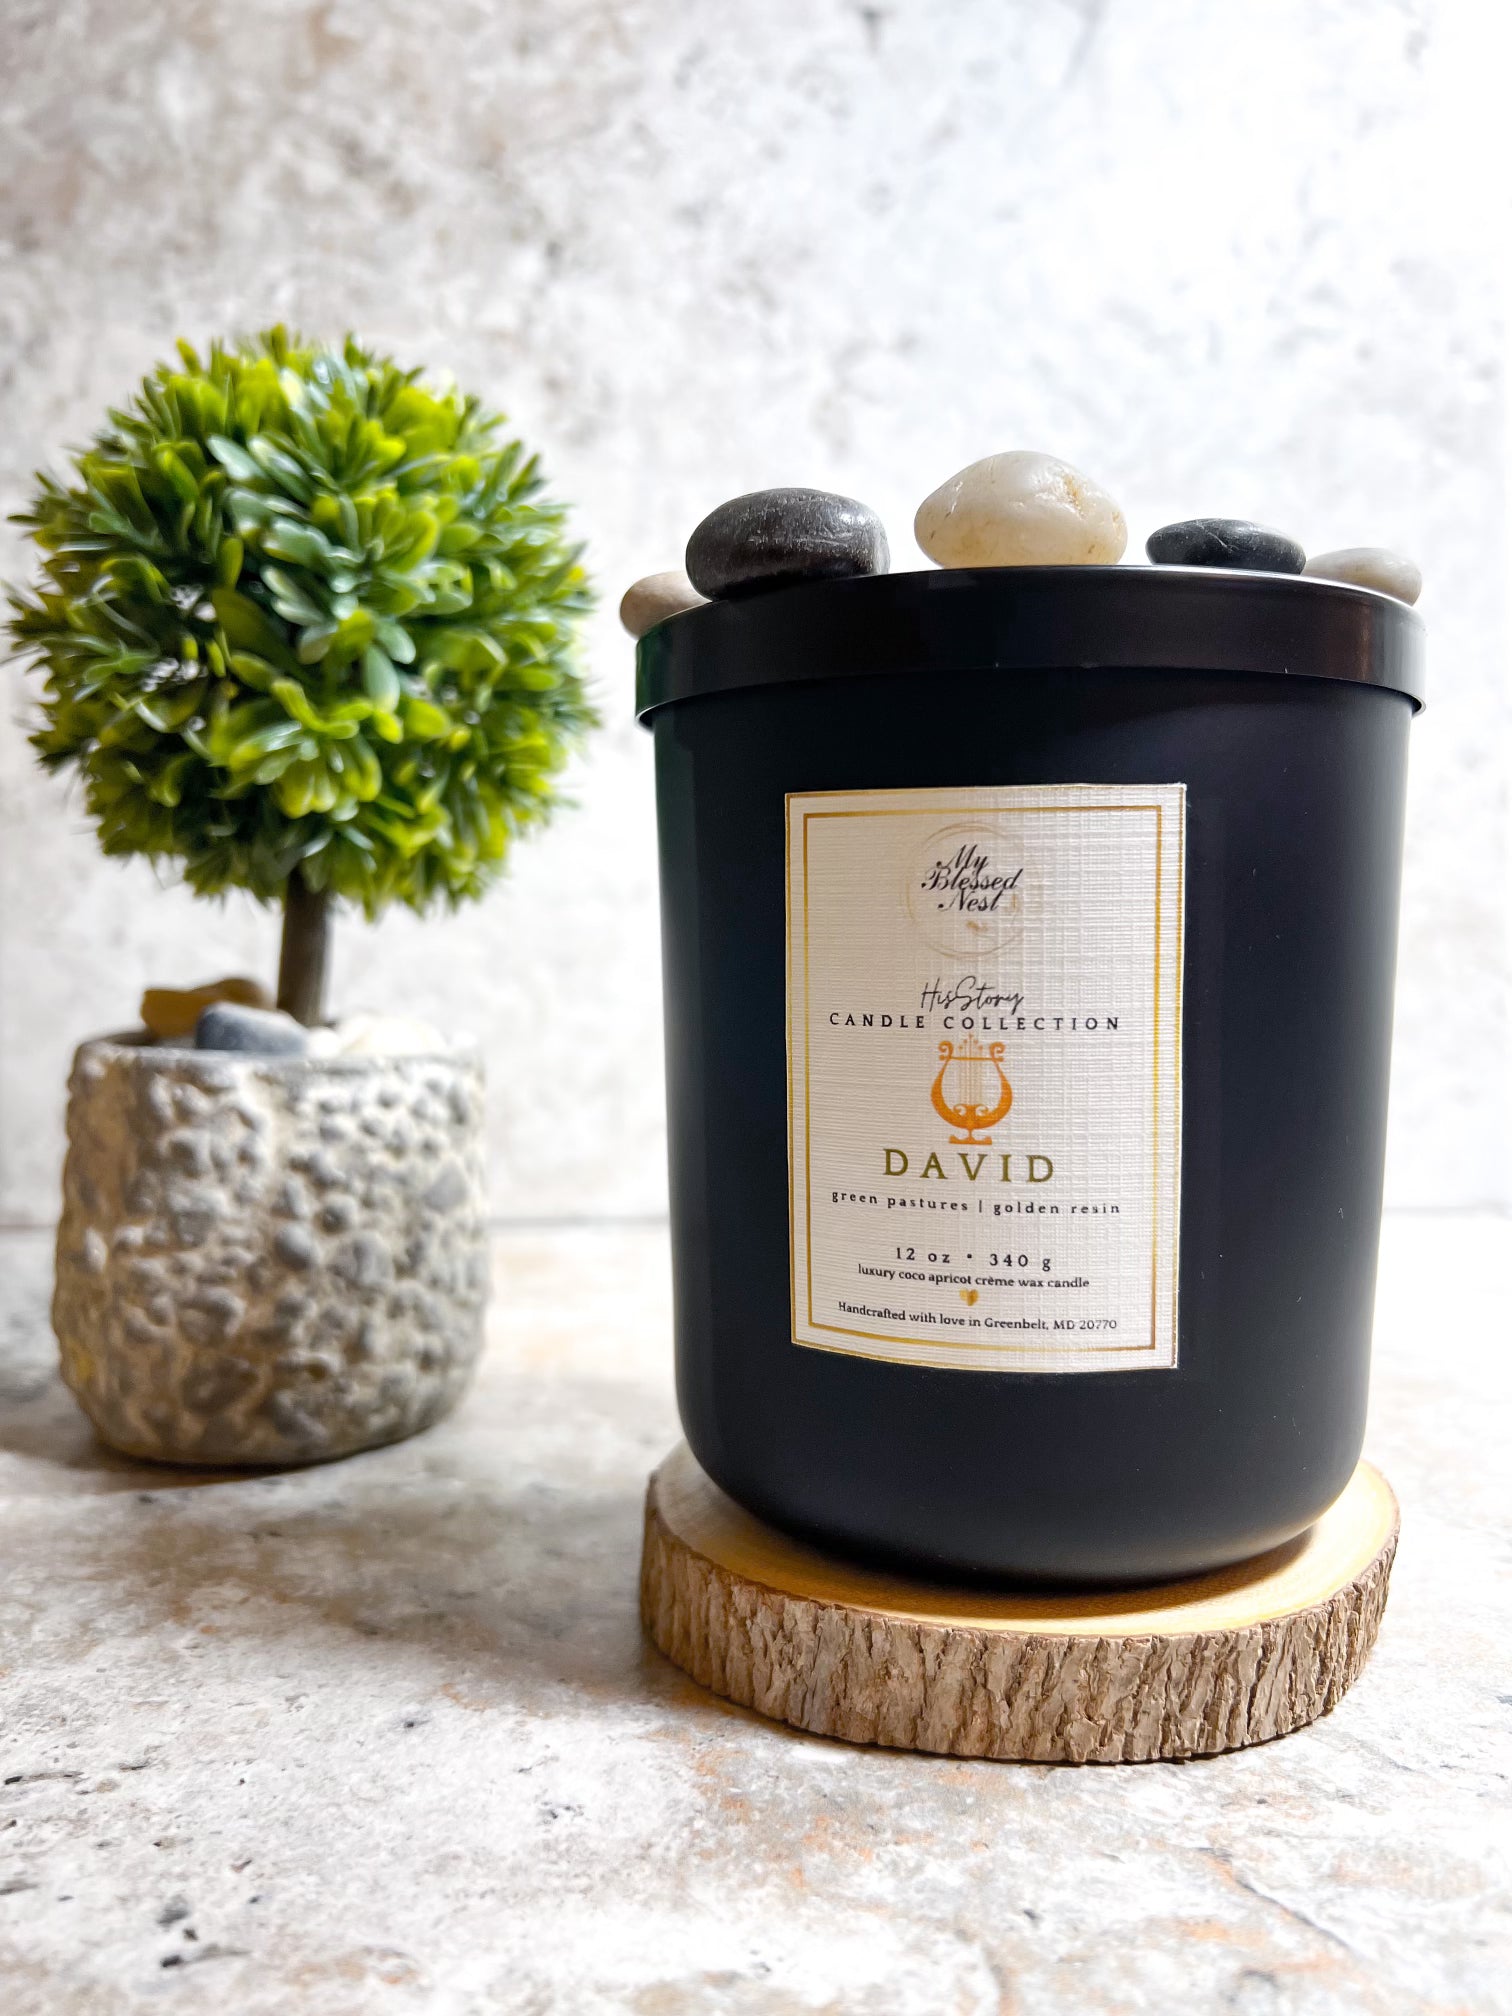 12 oz David Candle, label facing slight left, from our His Story Candle Collection